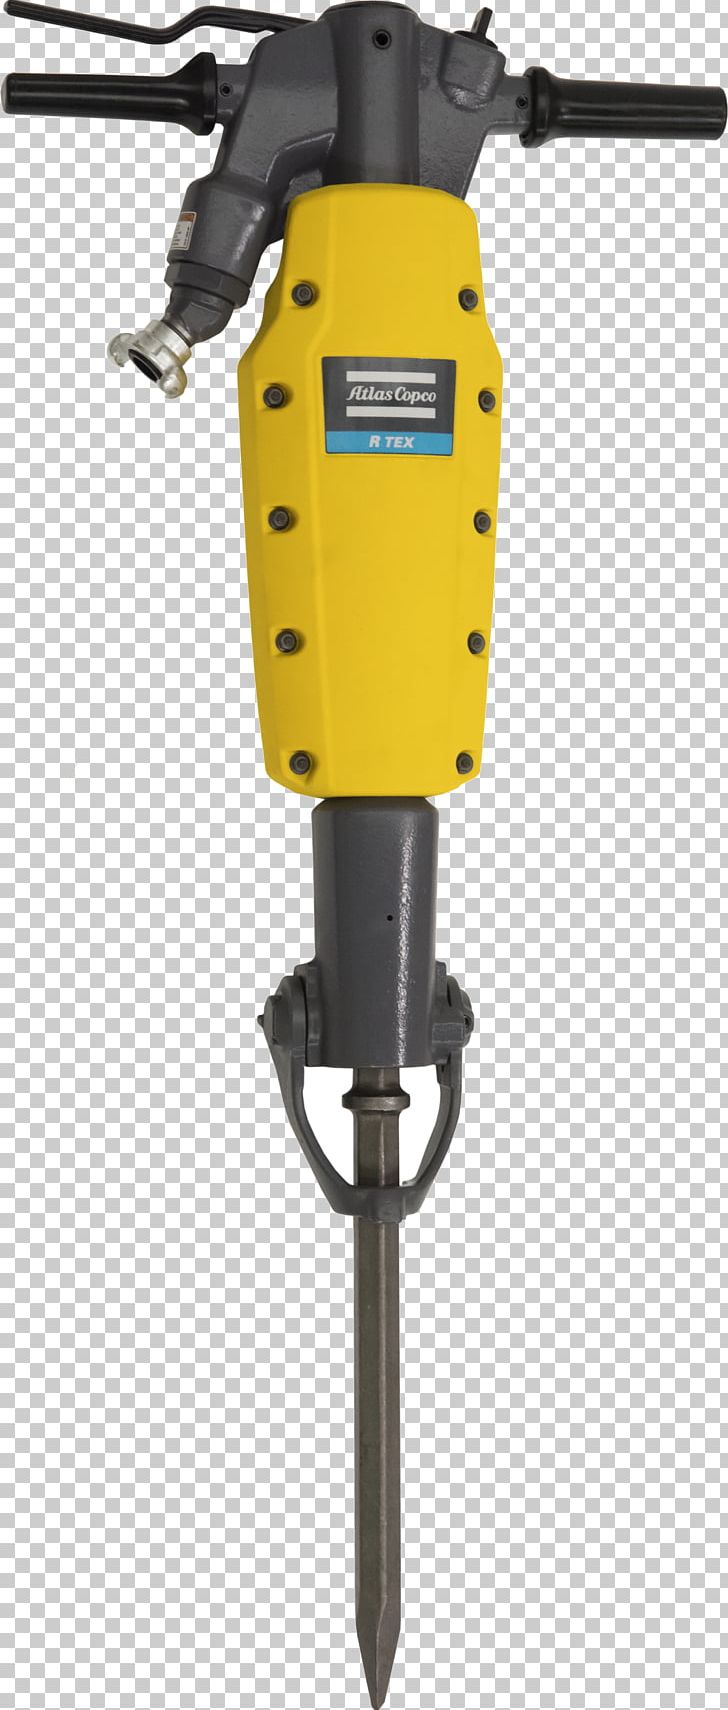 Breaker Jackhammer Pneumatics Architectural Engineering Atlas Copco PNG, Clipart, Angle, Architectural Engineering, Atlas, Atlas Copco, Augers Free PNG Download